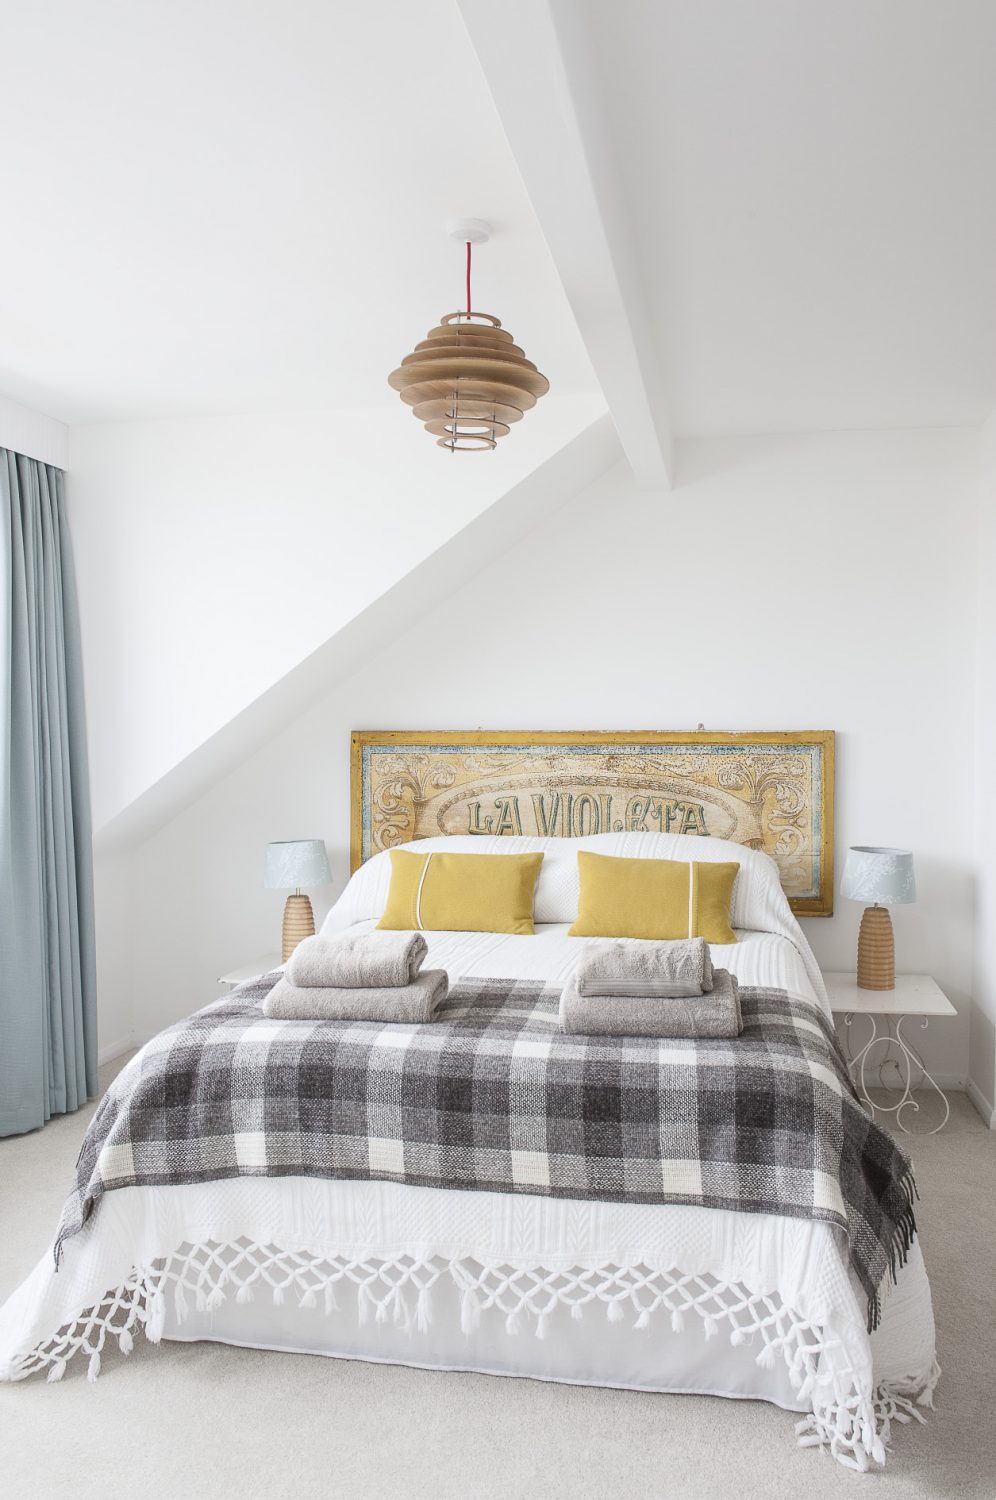 An old fairground sign from France forms a bedstead in the master bedroom